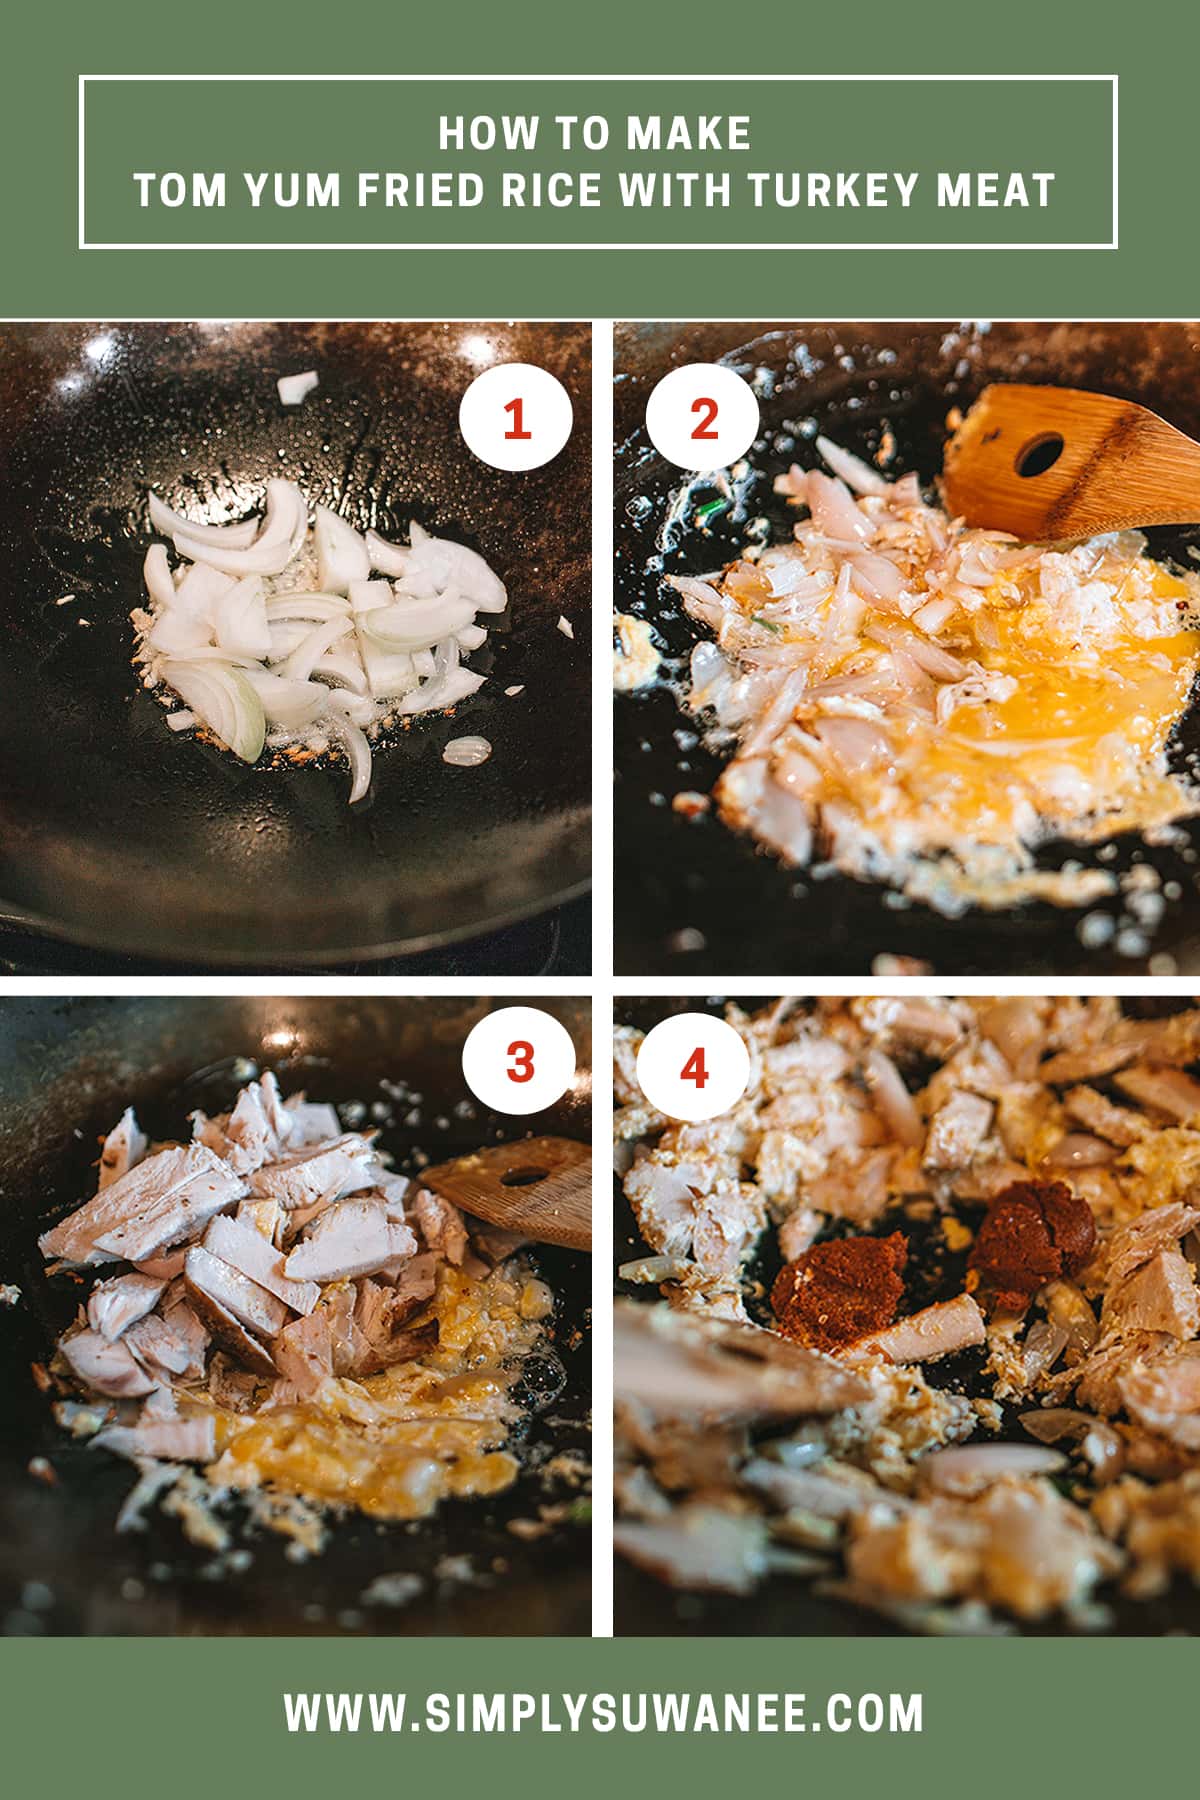 Step by step photos (5-8) how to make fried rice